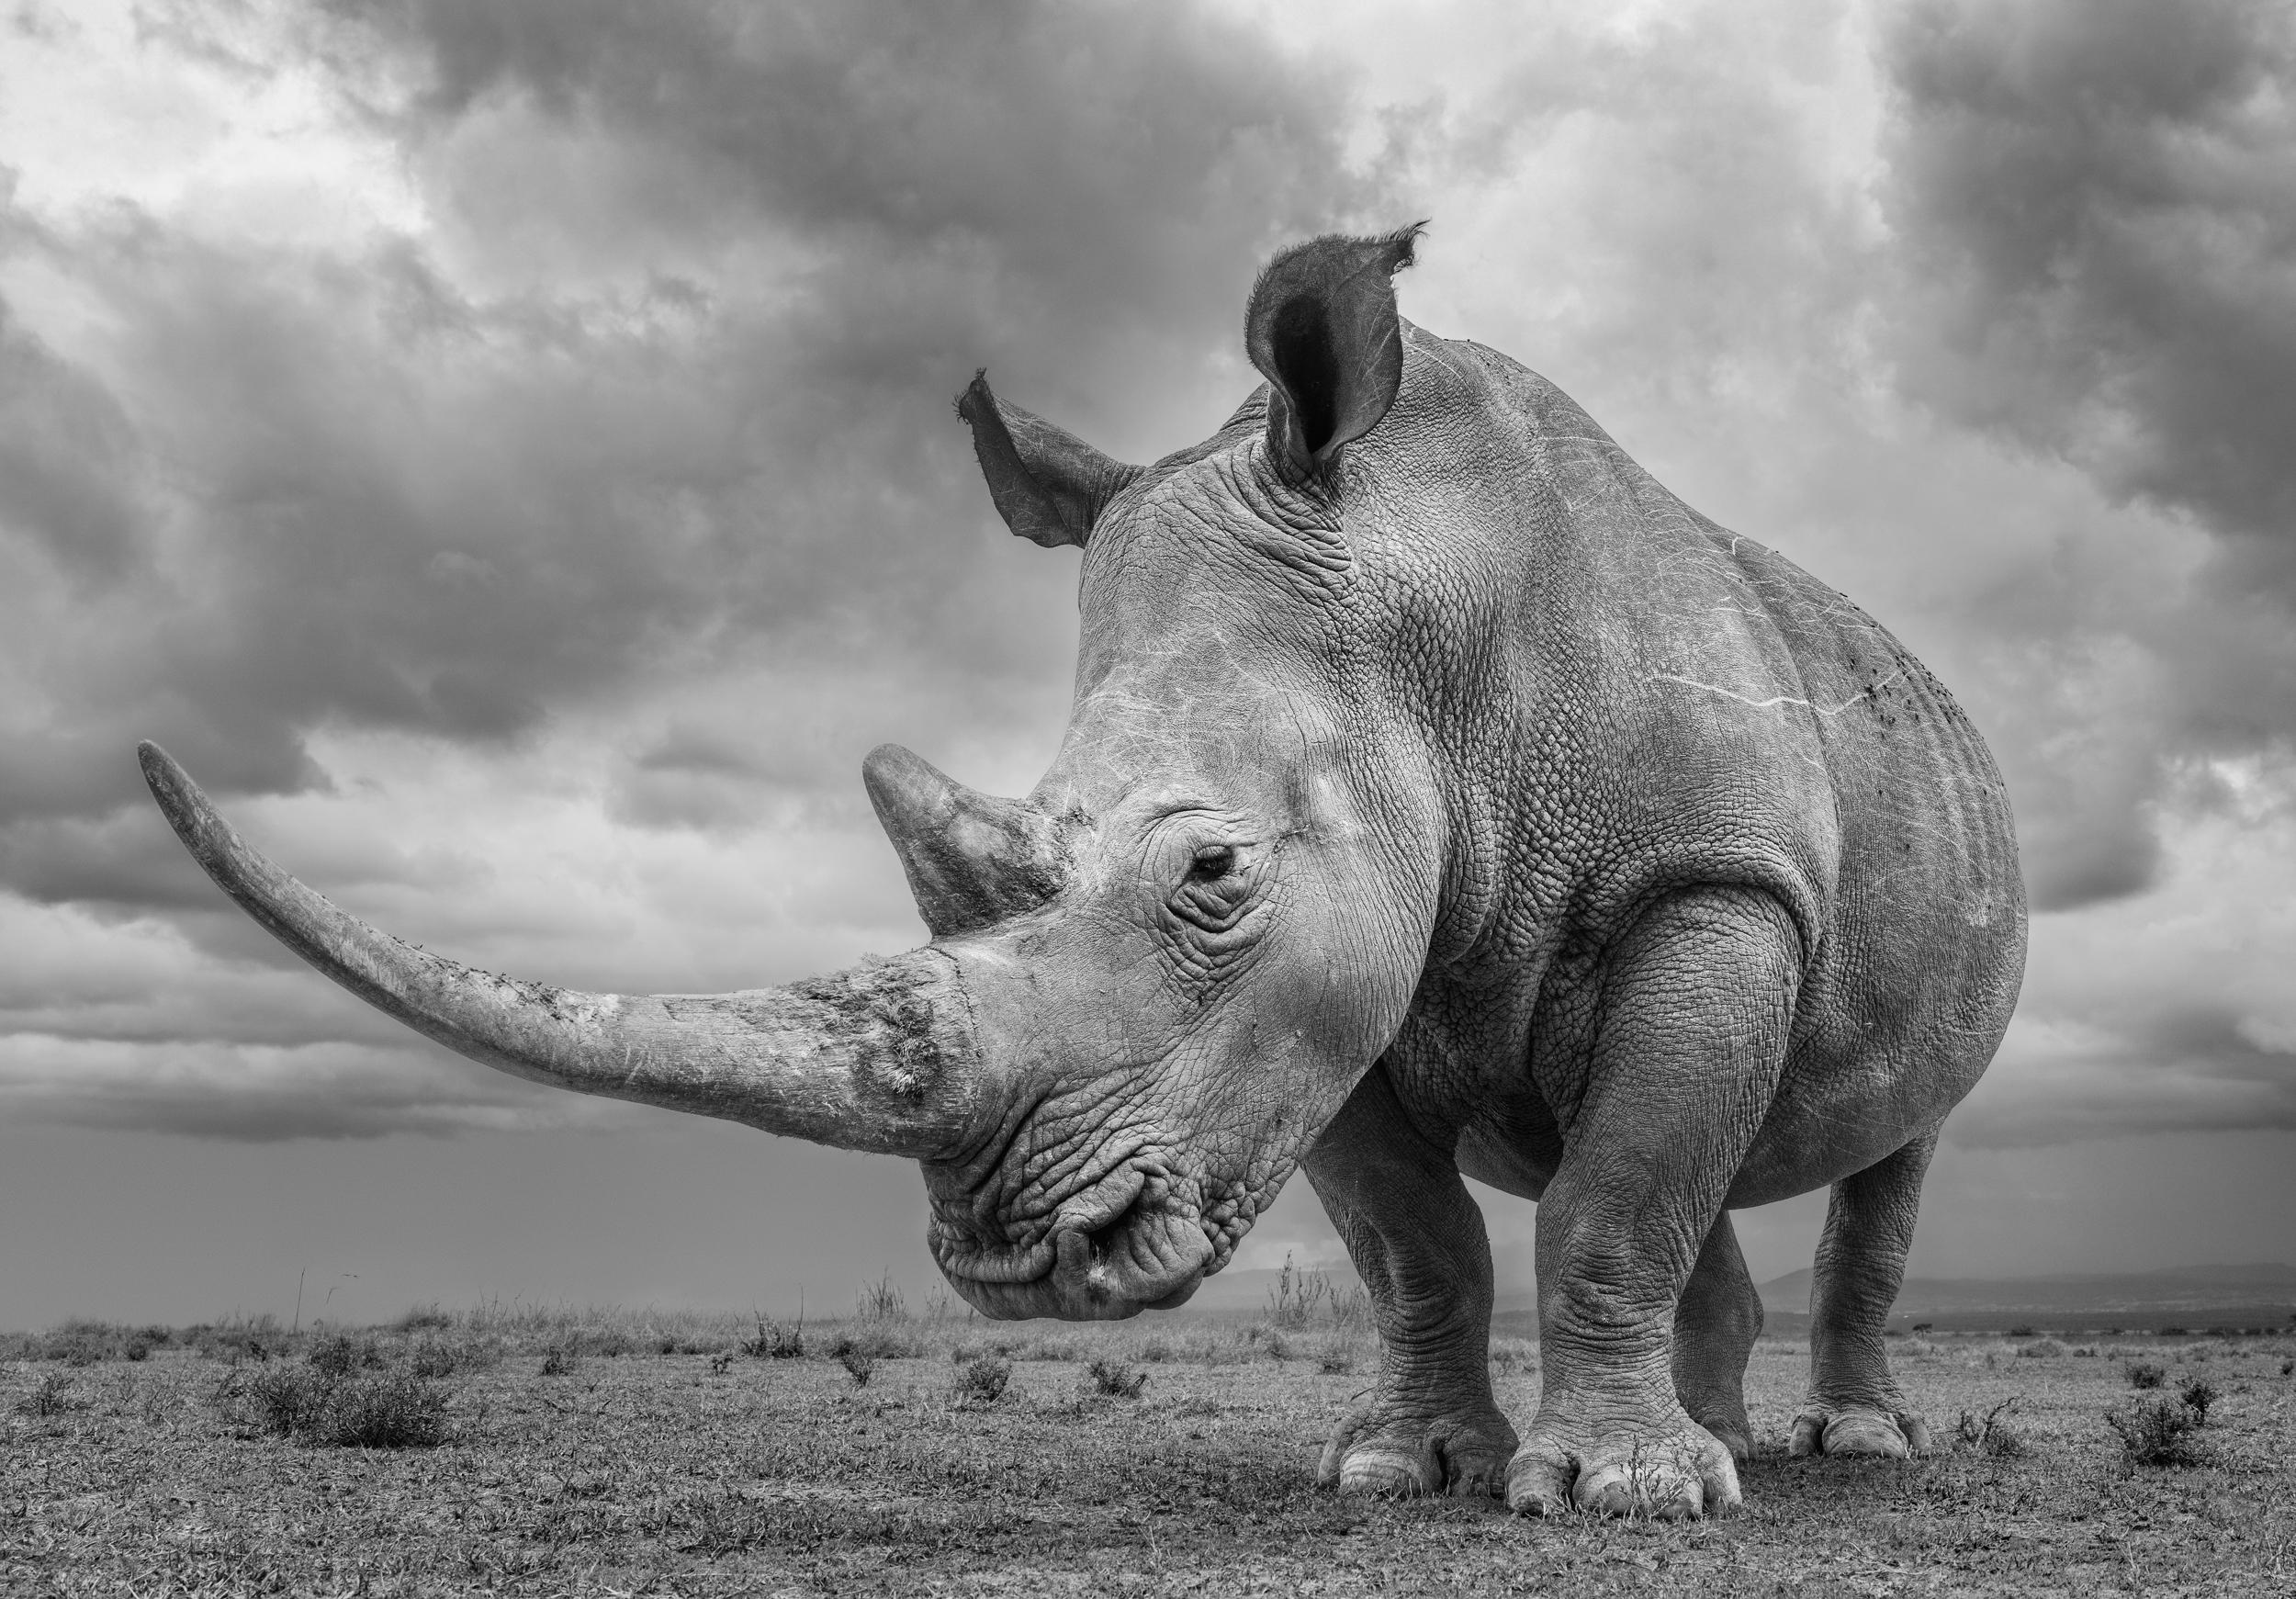 "It’s difficult to describe how I felt lying flat on the ground with a two-tonne rhino only a few feet in front of me. It was, without a doubt, one of my most treasured memories and one I will never forget. It was an absolute privilege to be within